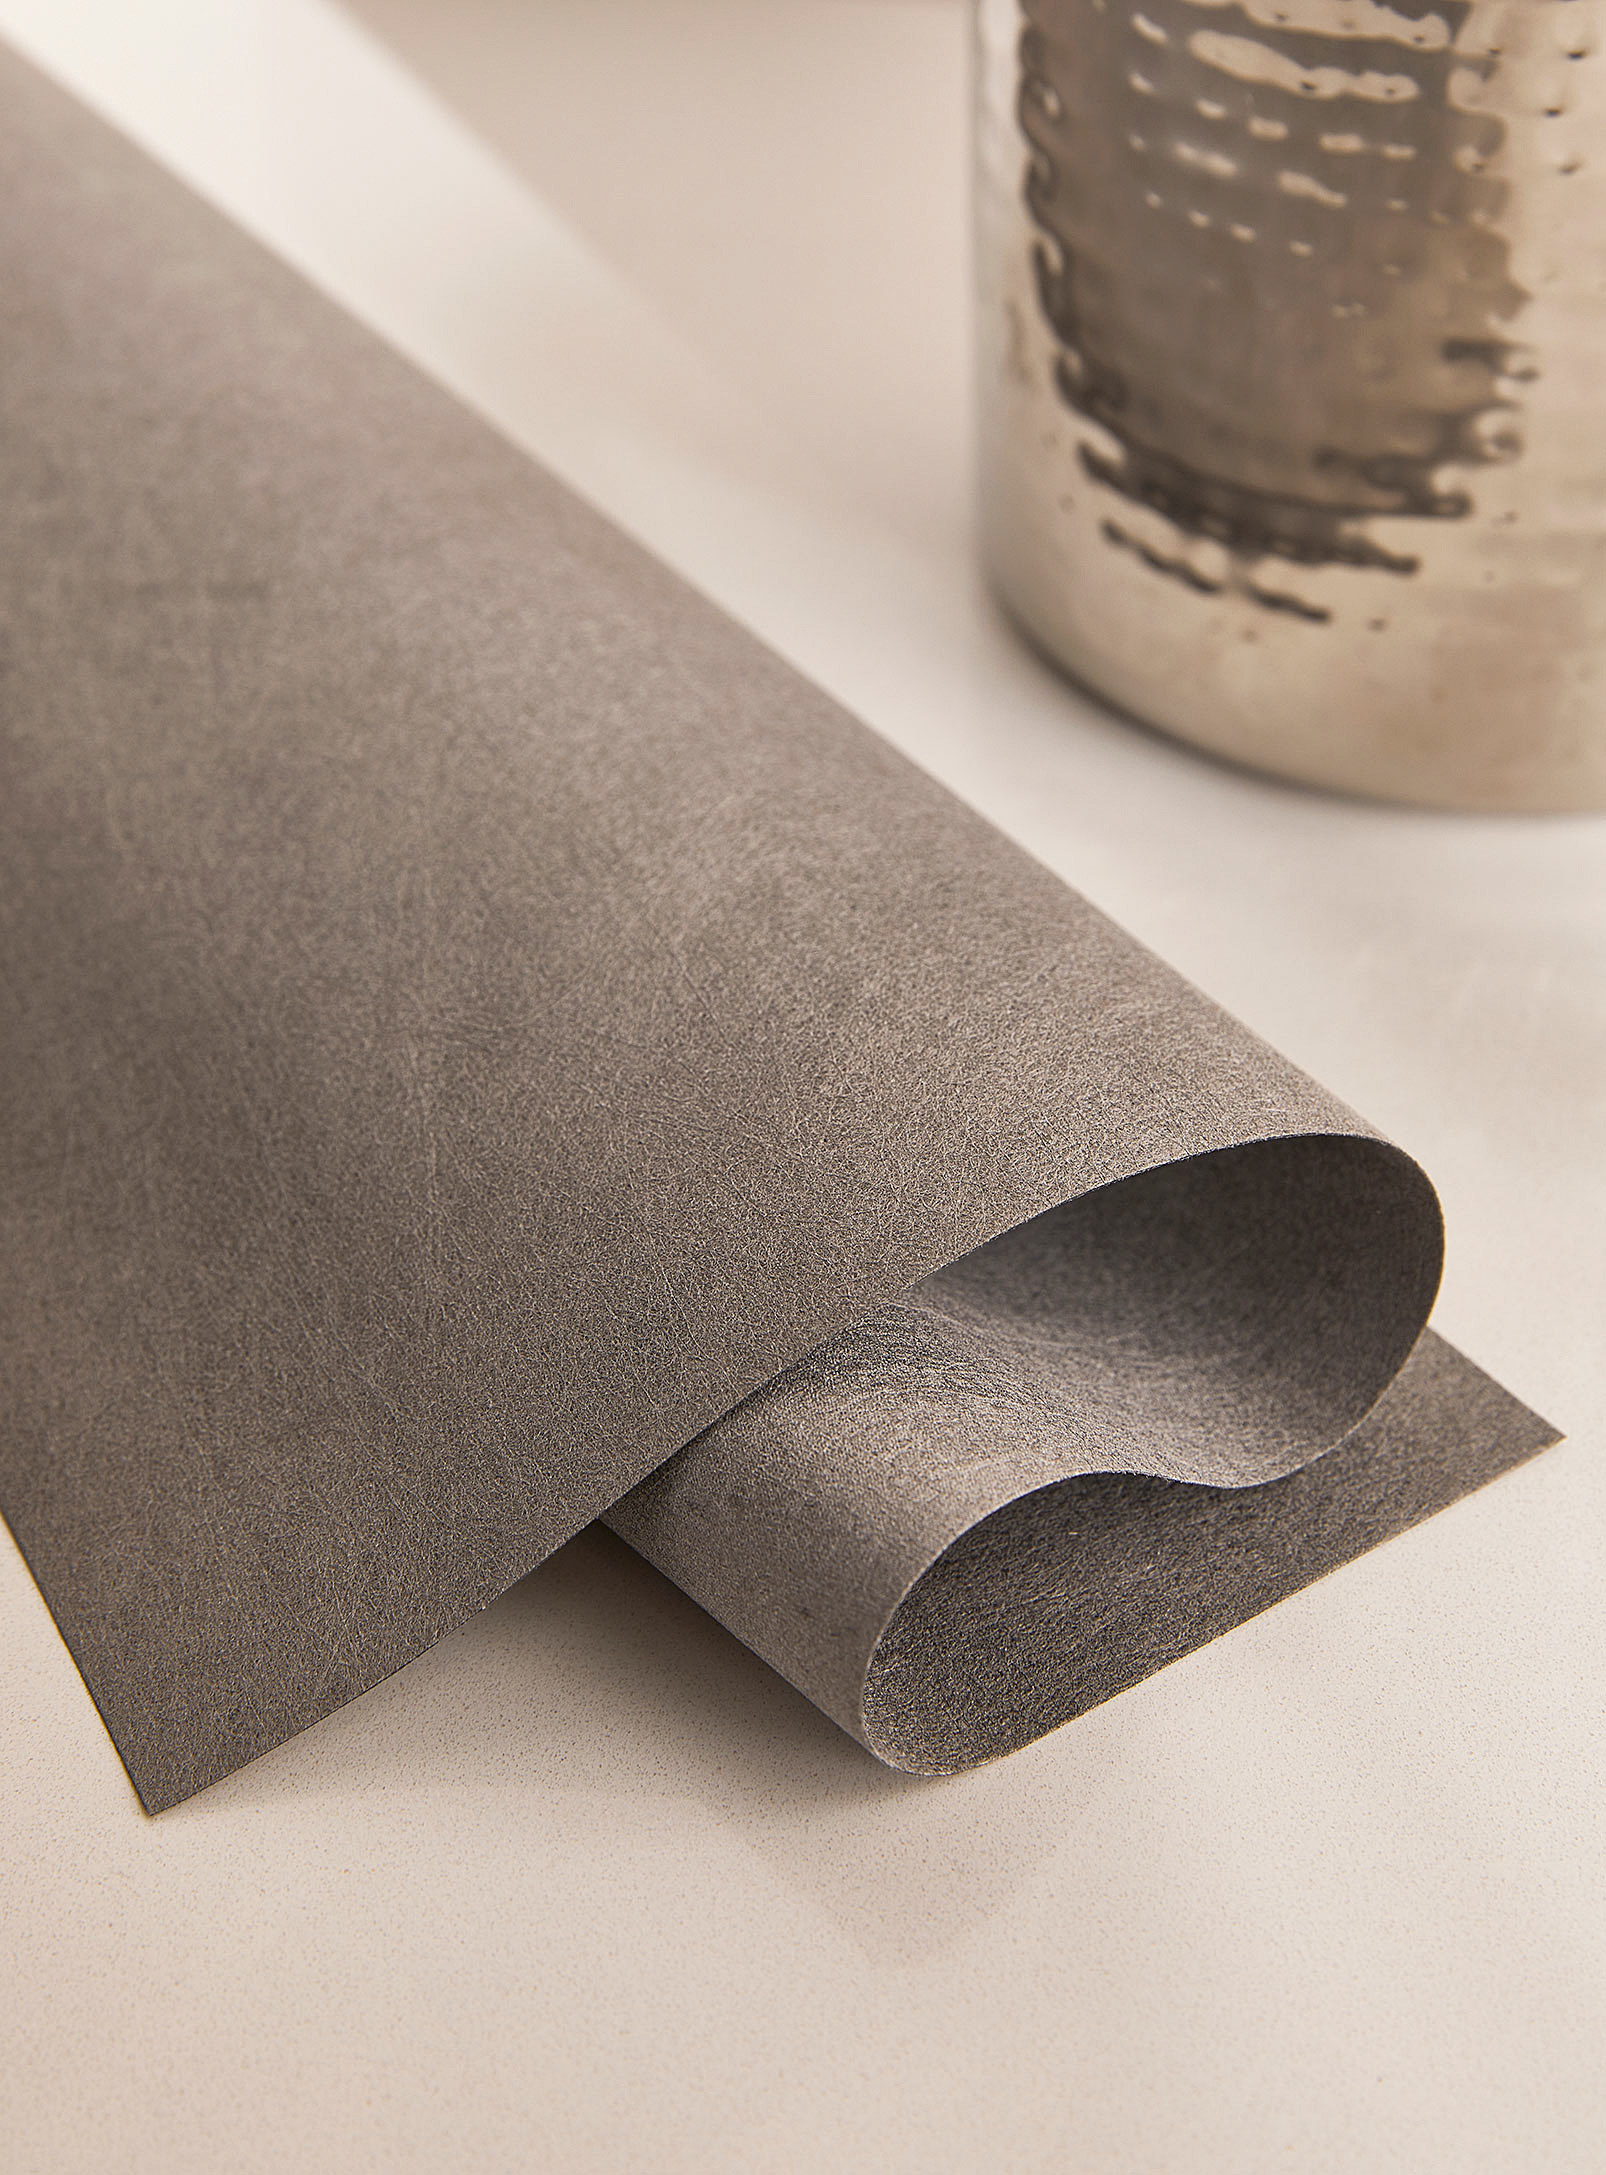 a roll of the fast-absorbing cleaning cloth next to a metallic planter